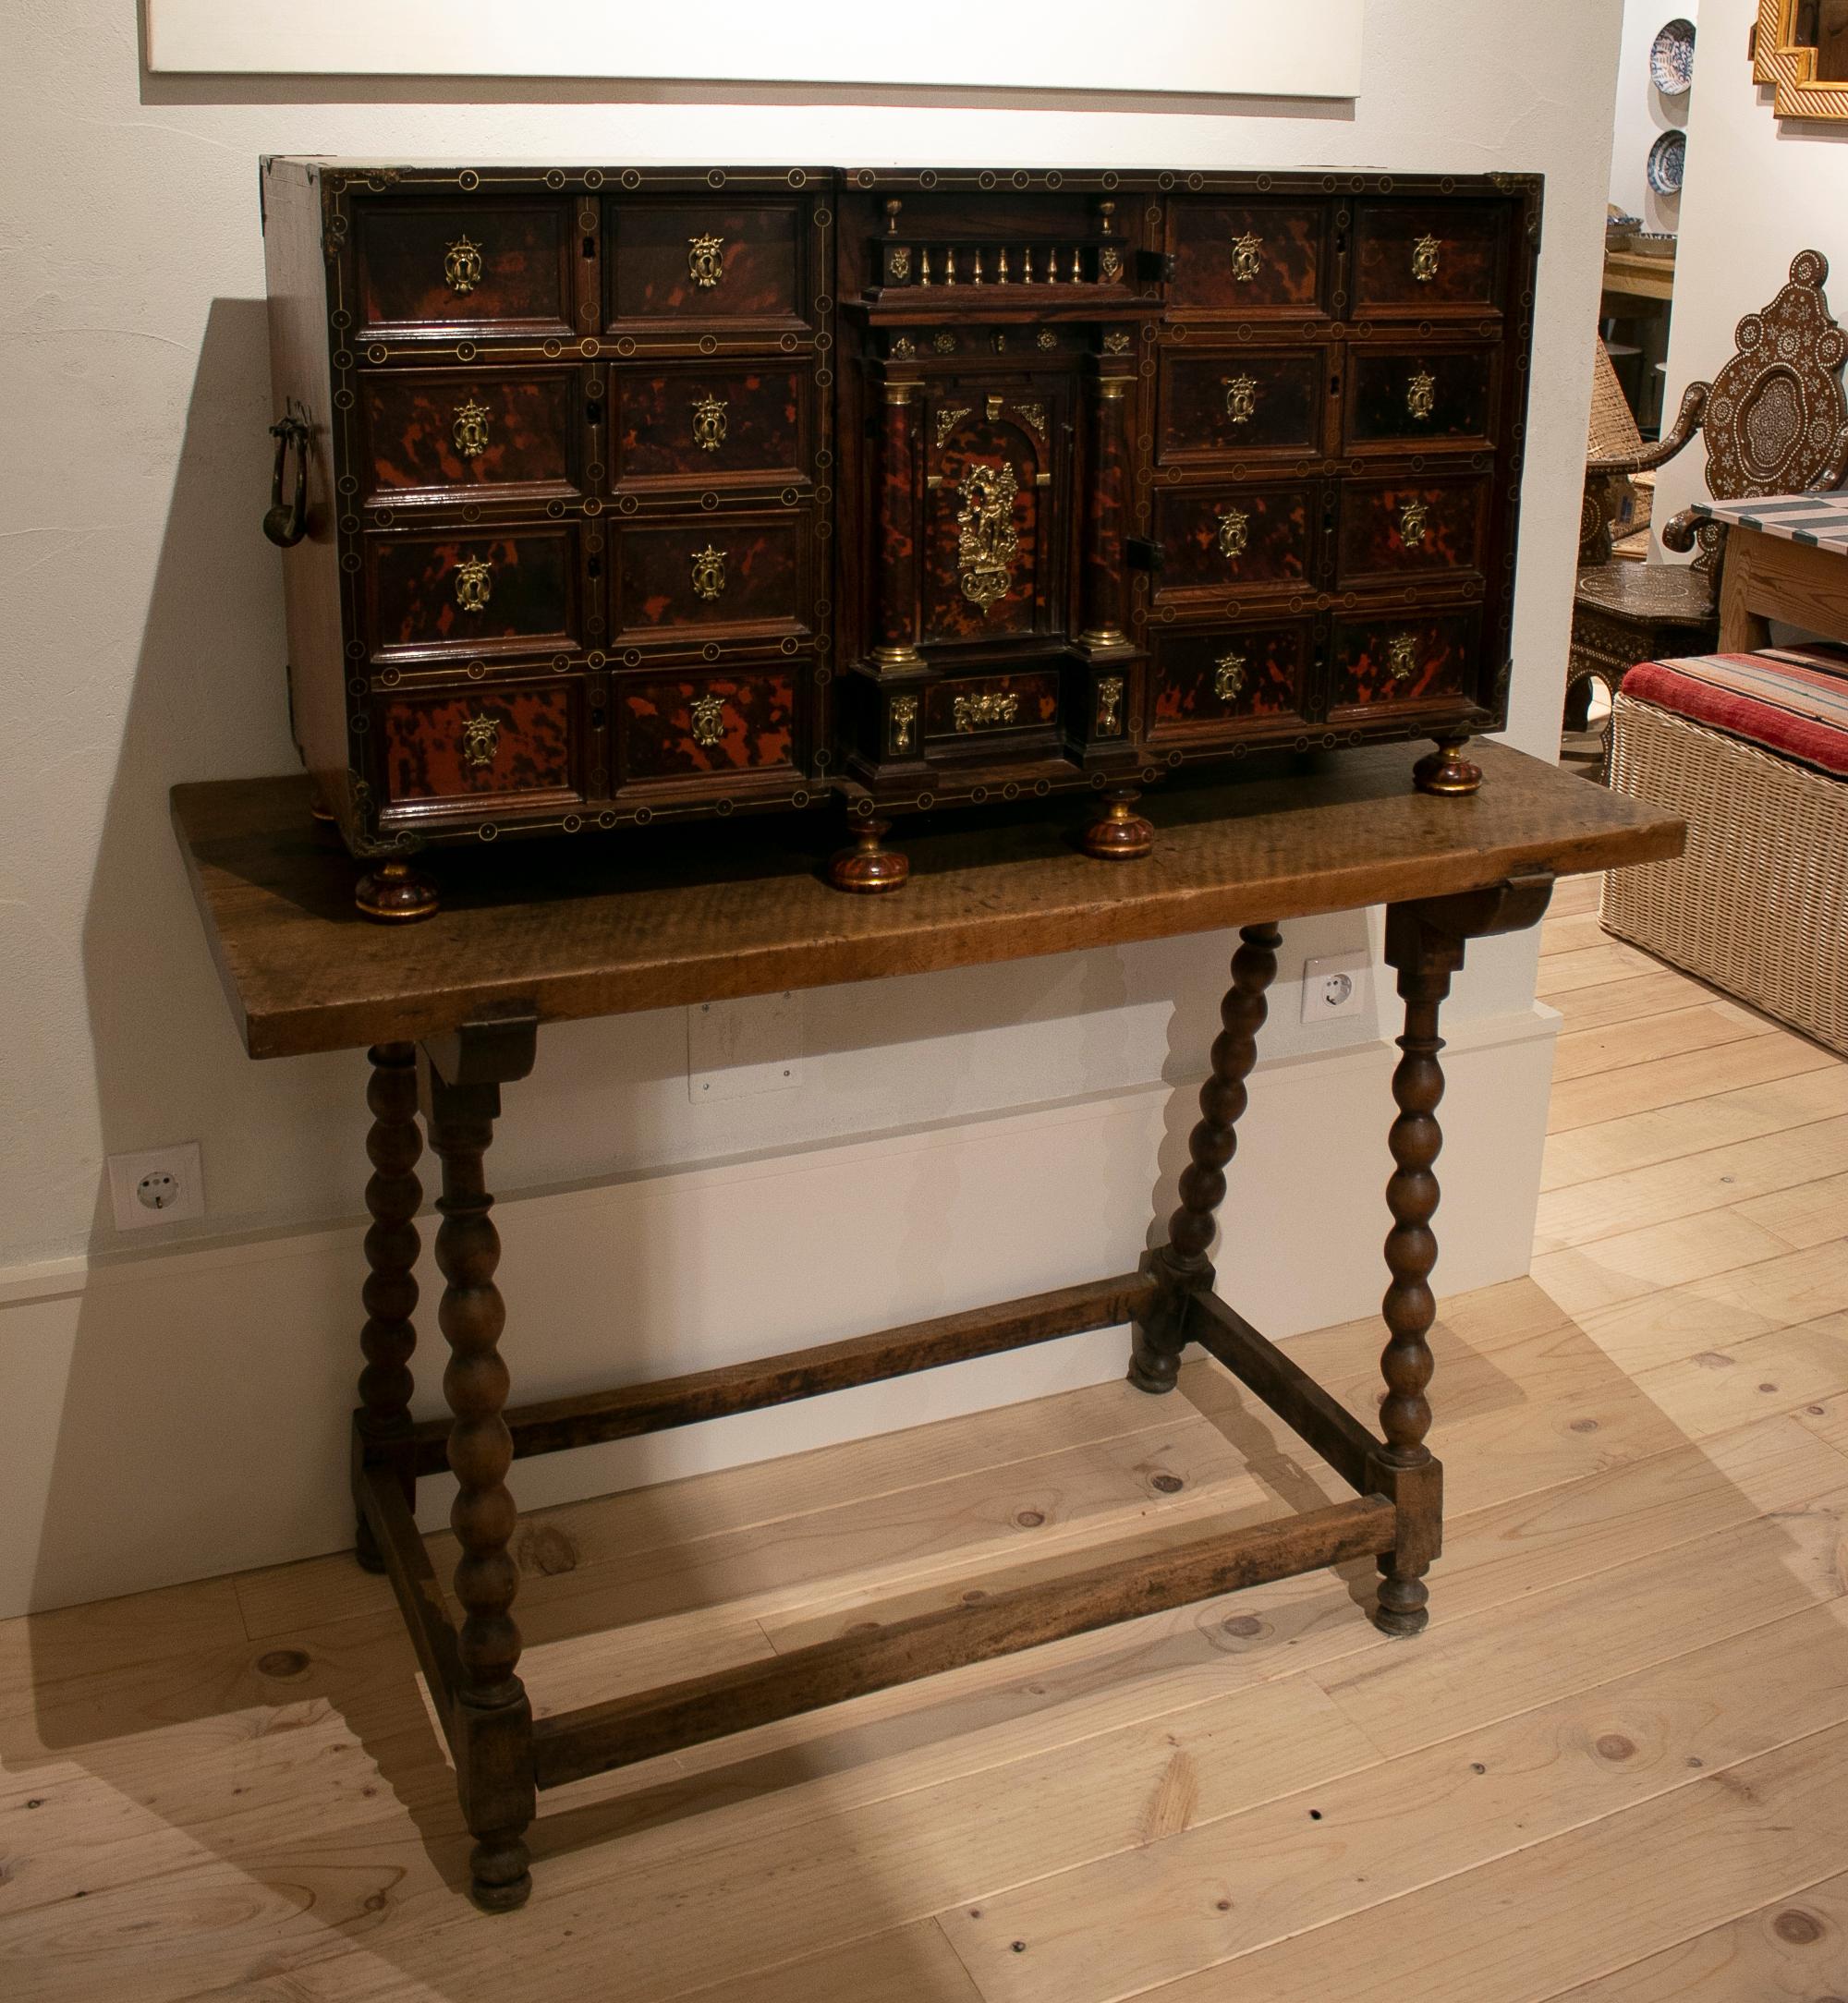 17th century Spanish wood and tortoise shell bargueño offices desk with drawers and taquillón, the bottom desk it sits on.